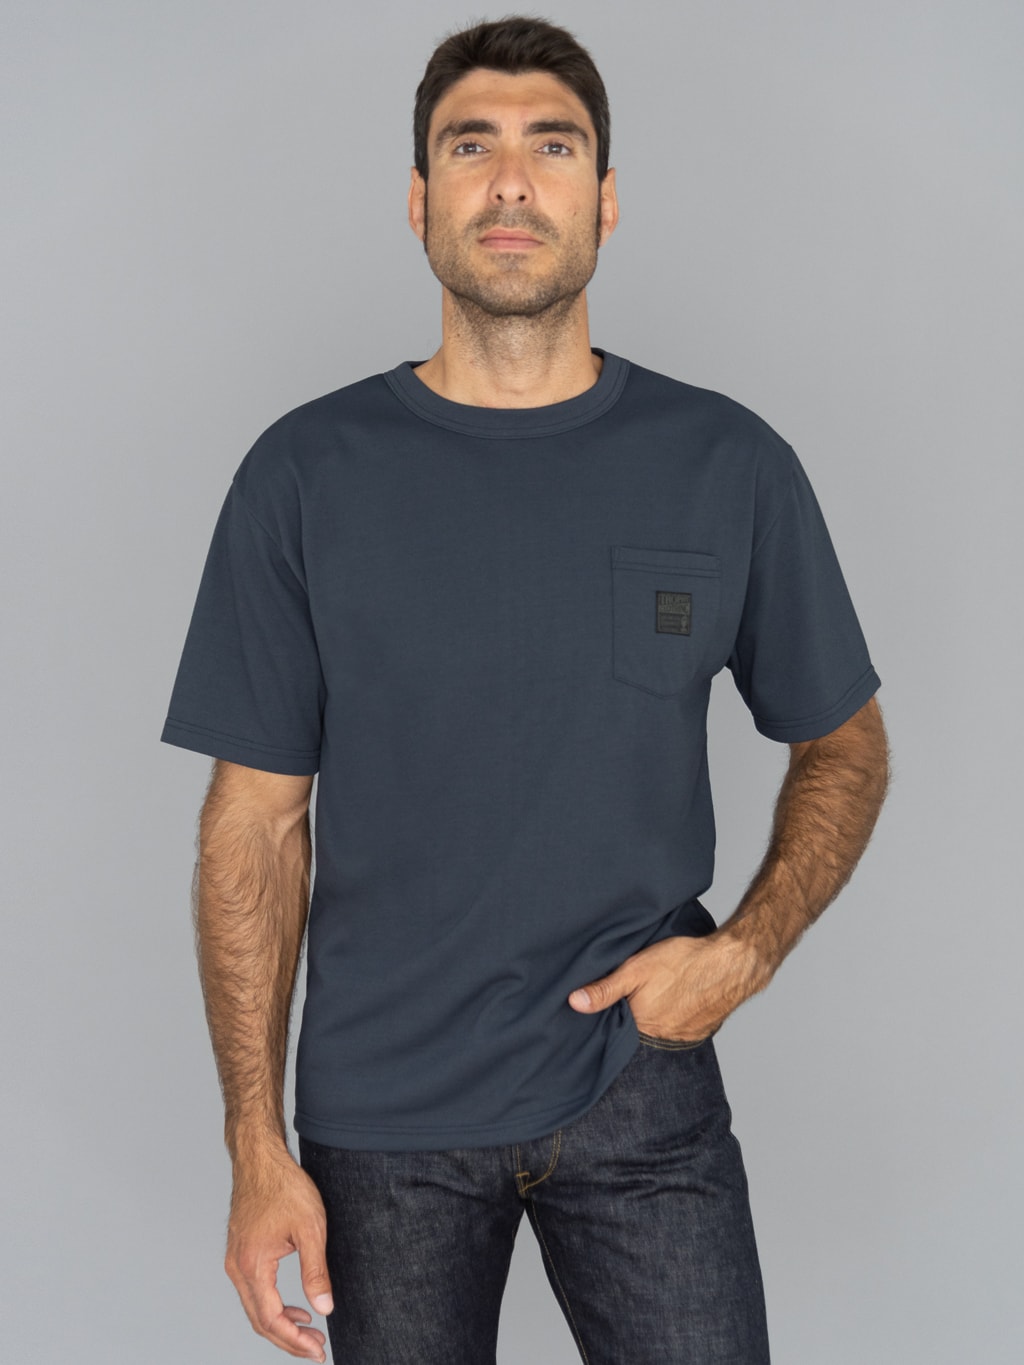 trophy clothing monochrome pc pocket tee charcoal  model fit